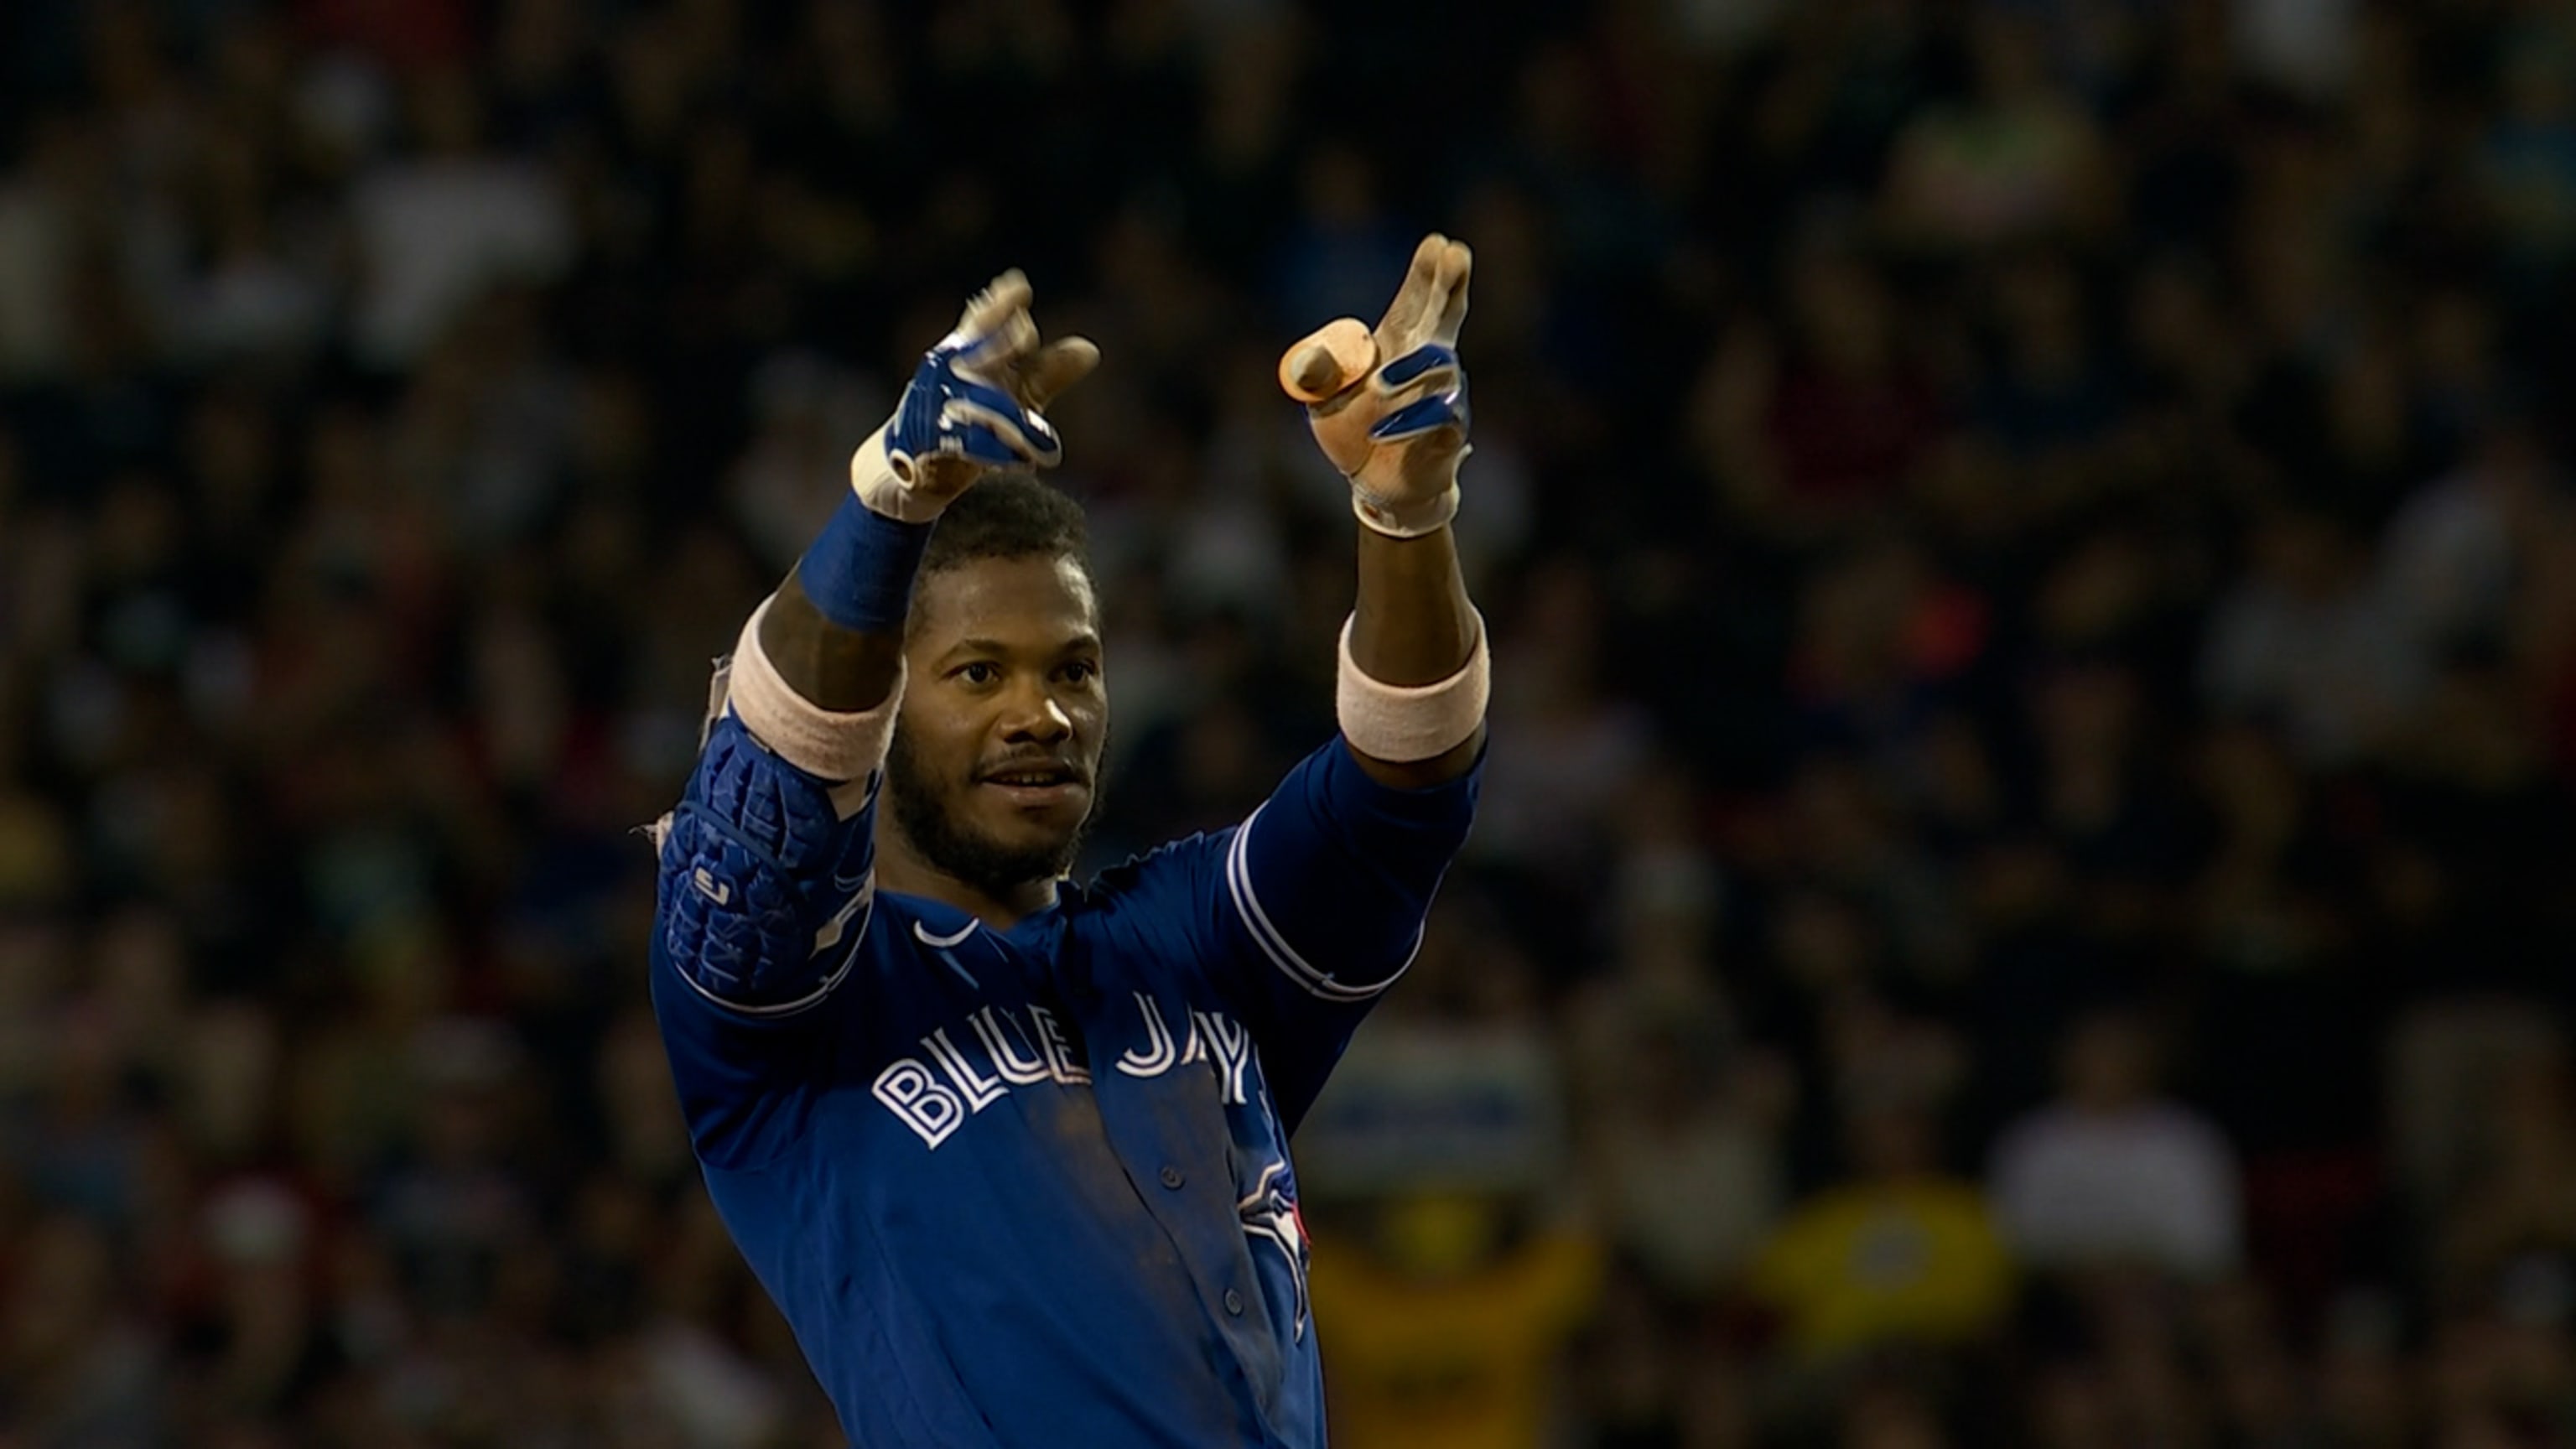 Tapia inside-the-park slam lifts Blue Jays over Red Sox 28-5